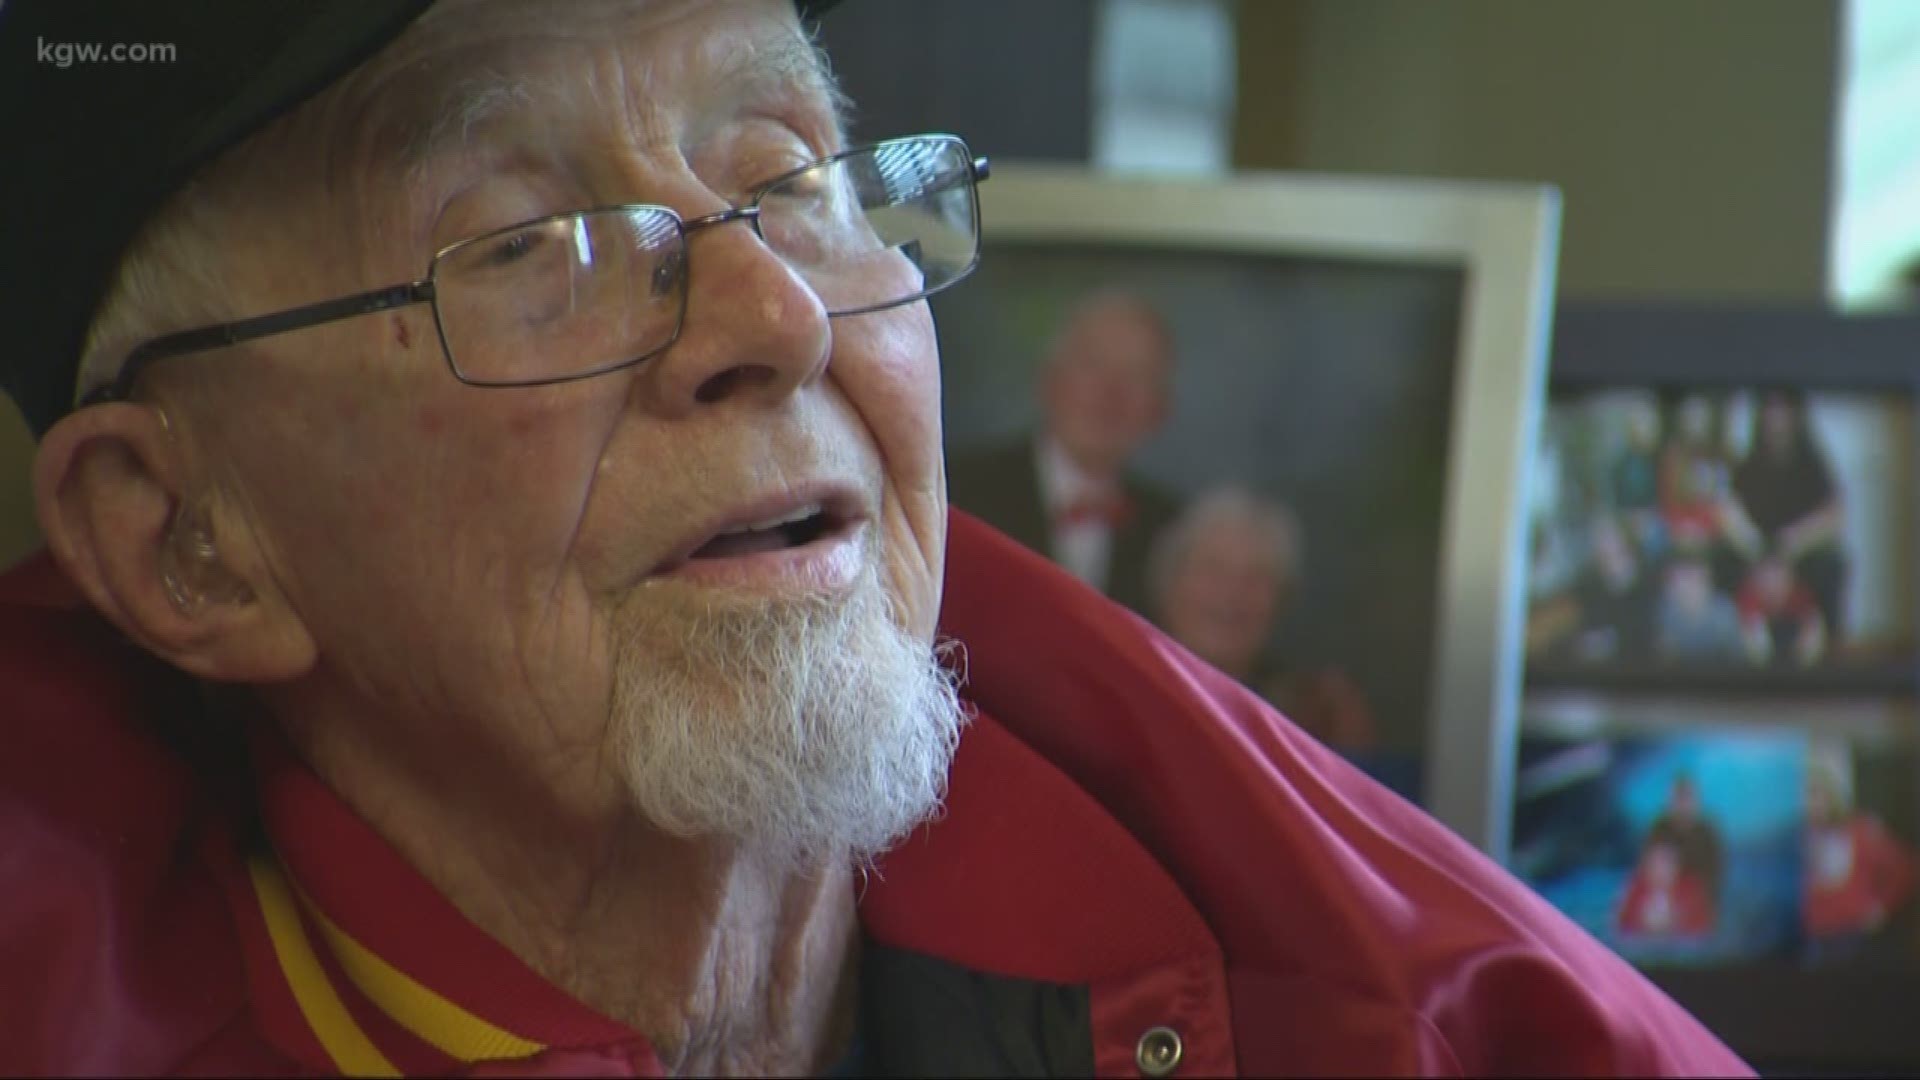 Robin Barrett, 94, served in the Marines during WWII and witnessed the raising of the American flag at Mount Suribachi.